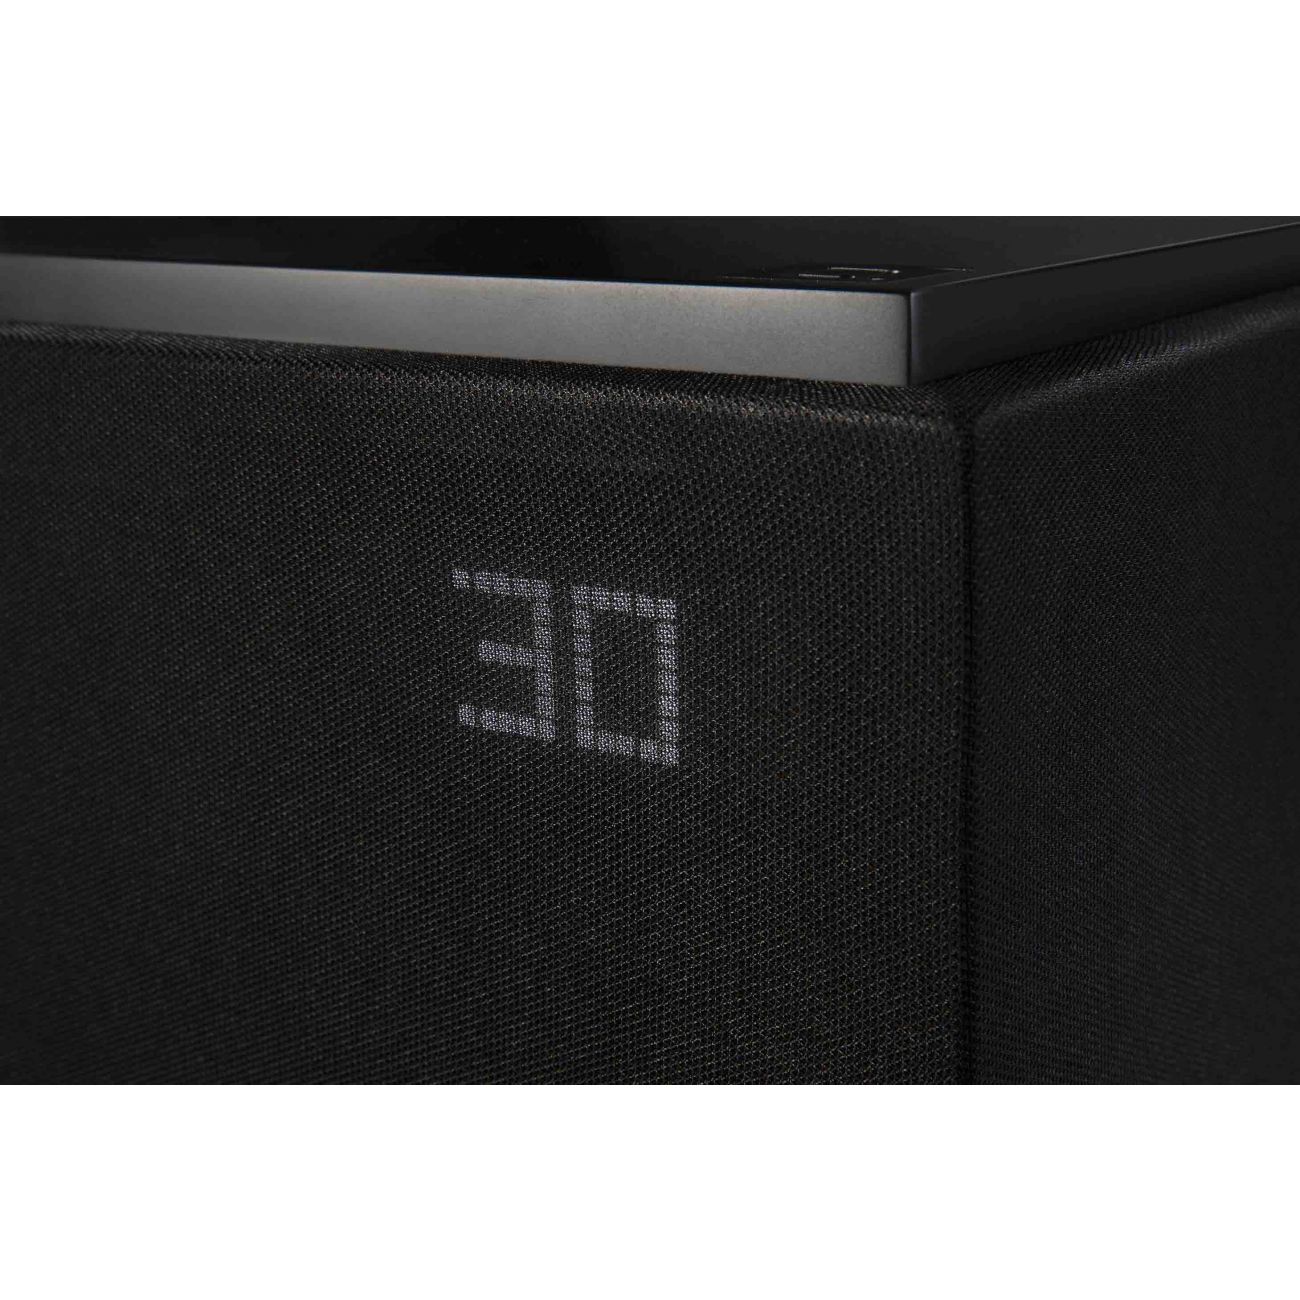 Definitive Technology DN15 15" 1500W Powered Subwoofer - Masters Voice Audio Visual